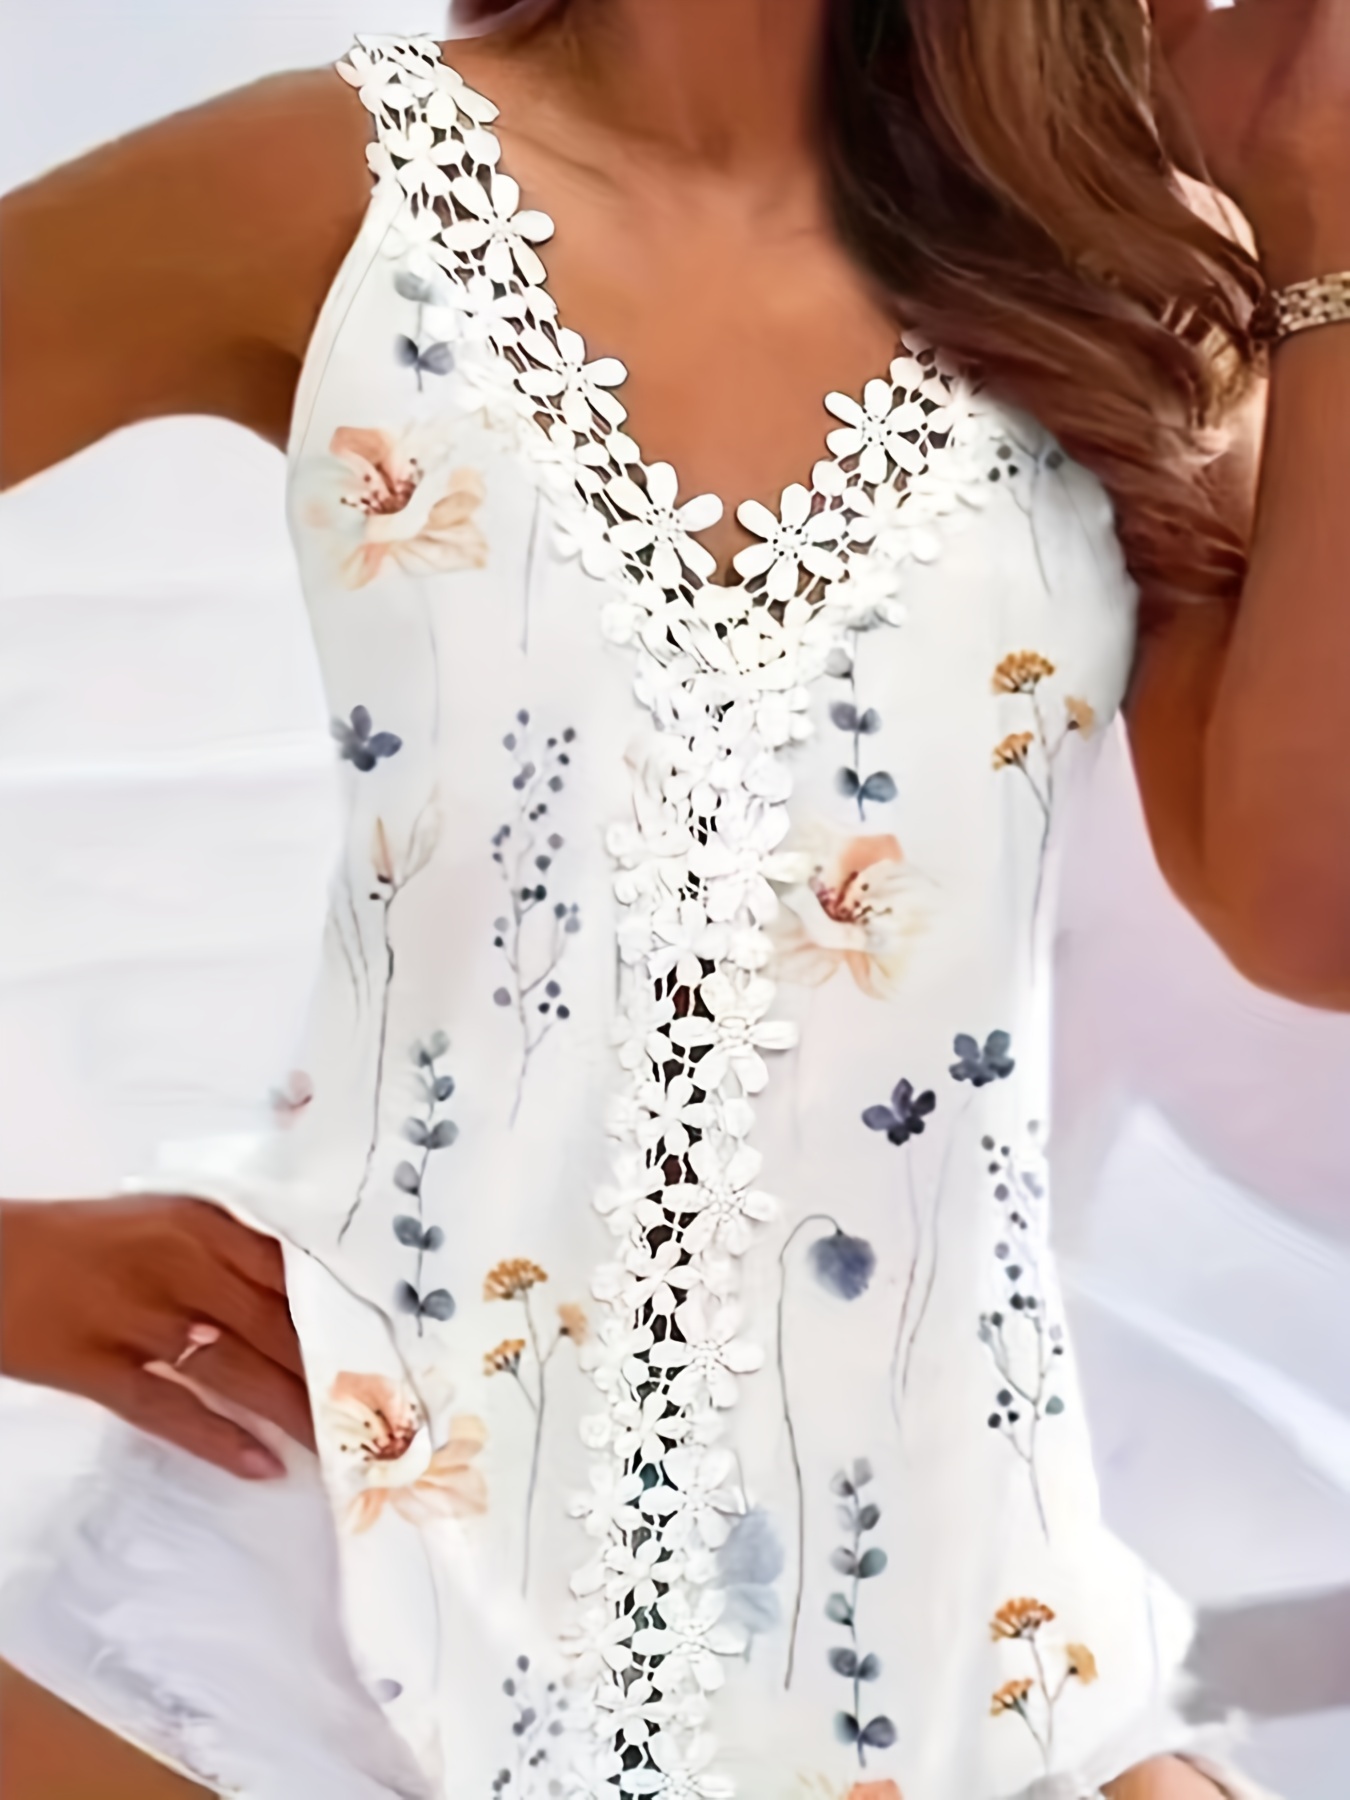 SEXY LOOSE CROP TANK TOP cami S WOMENS LACE SHIRT CASUAL FLORAL summer  blouse AU - ARNIVAL